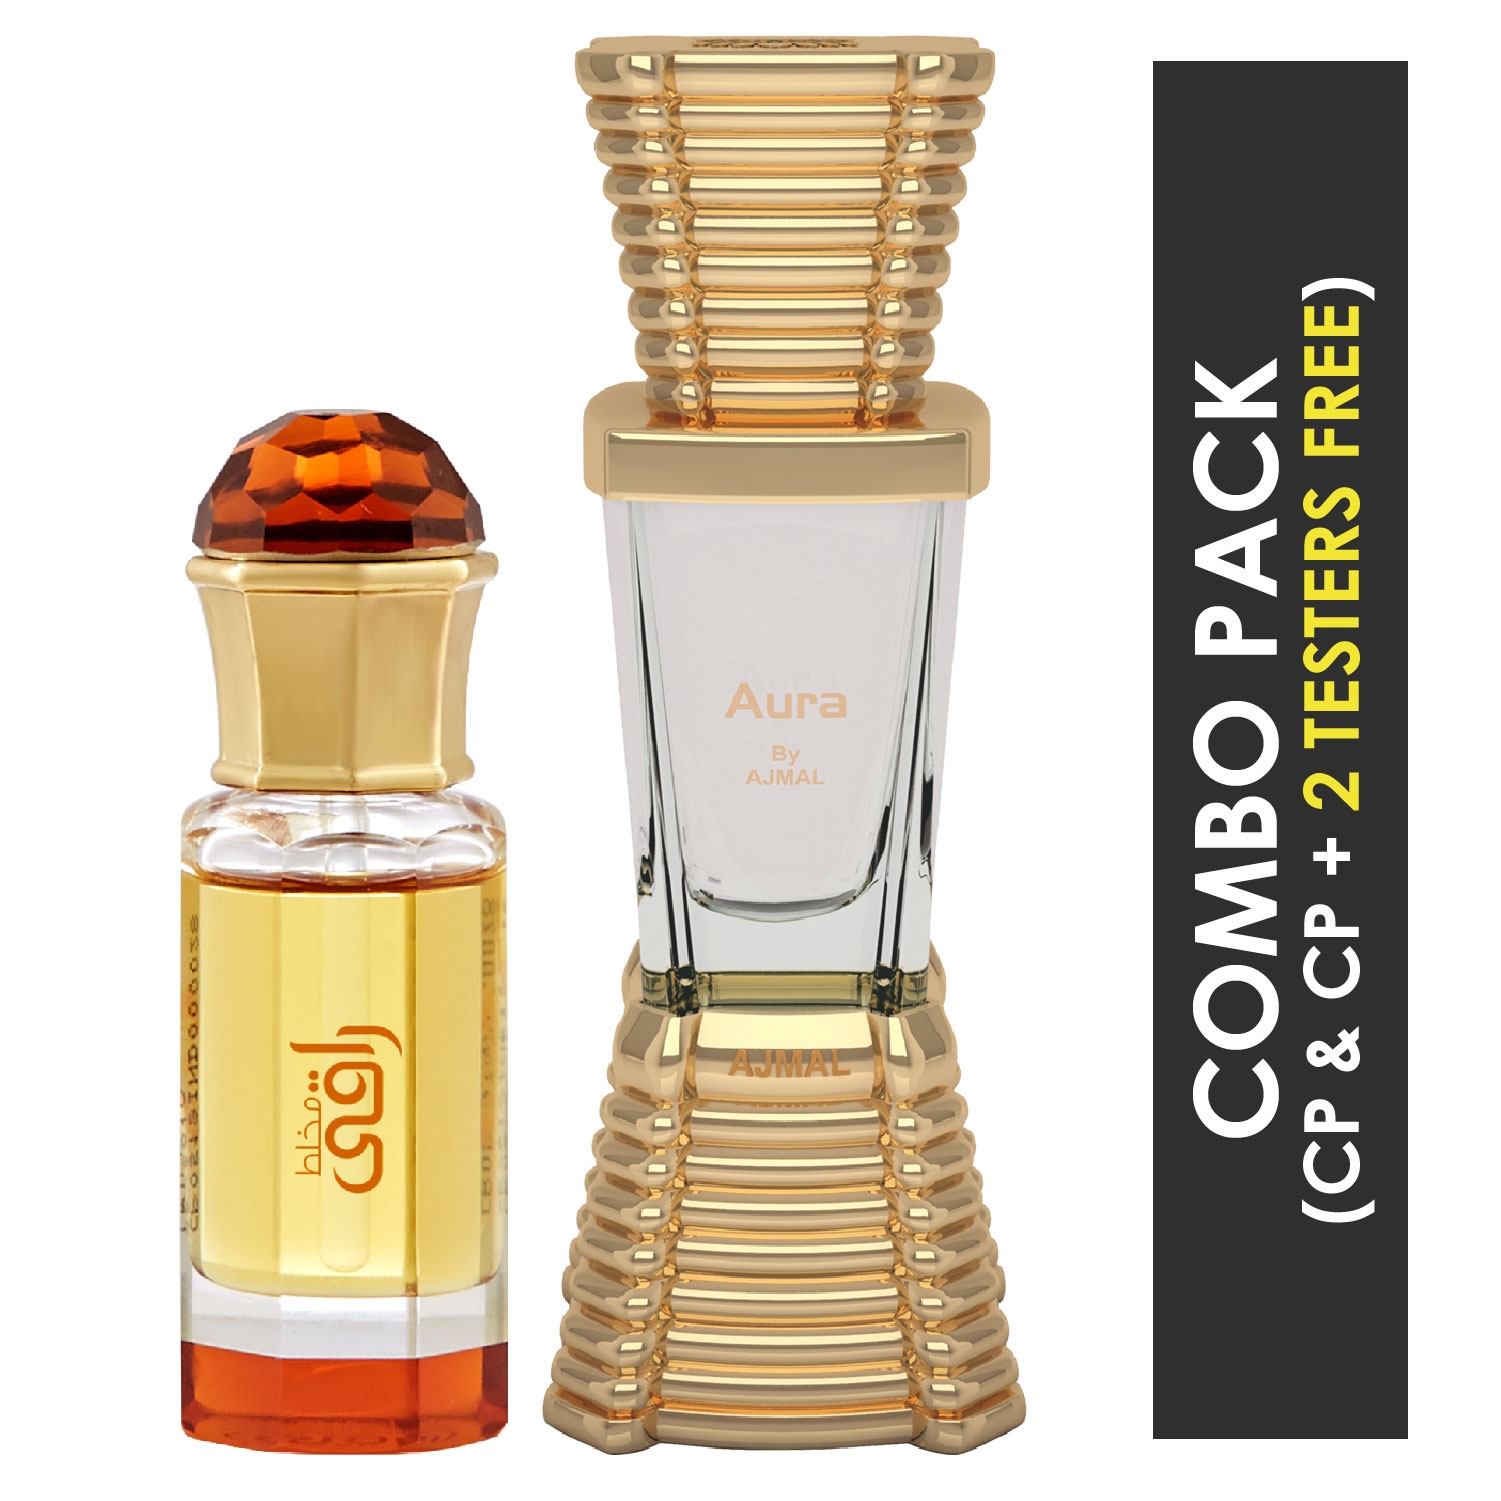 Ajmal | Ajmal Mukhallat Raaqi Concentrated Perfume Attar 10ml for Unisex and Aura Concentrated Perfume Attar 10ml for Unisex 2 Parfum Testers FREE